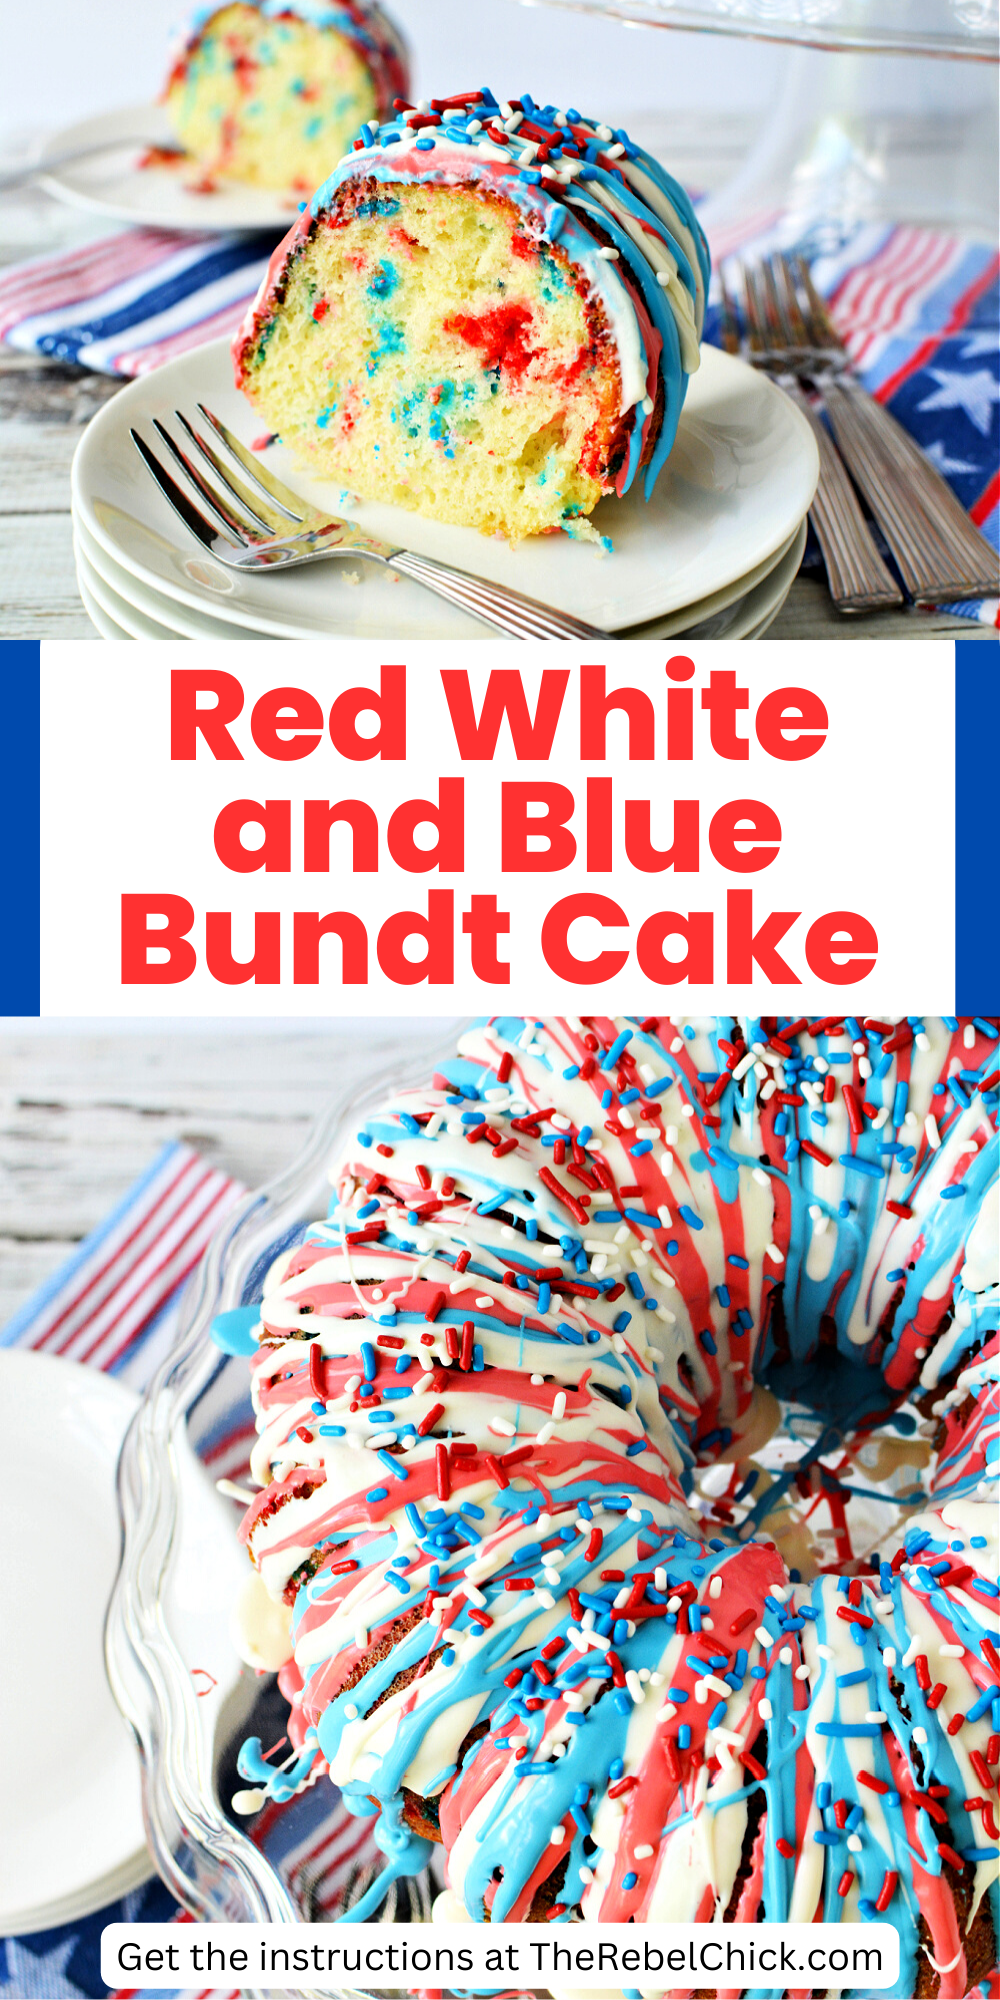 https://therebelchick.com/wp-content/uploads/2019/06/Red-White-and-Blue-Bundt-Cake-4.png